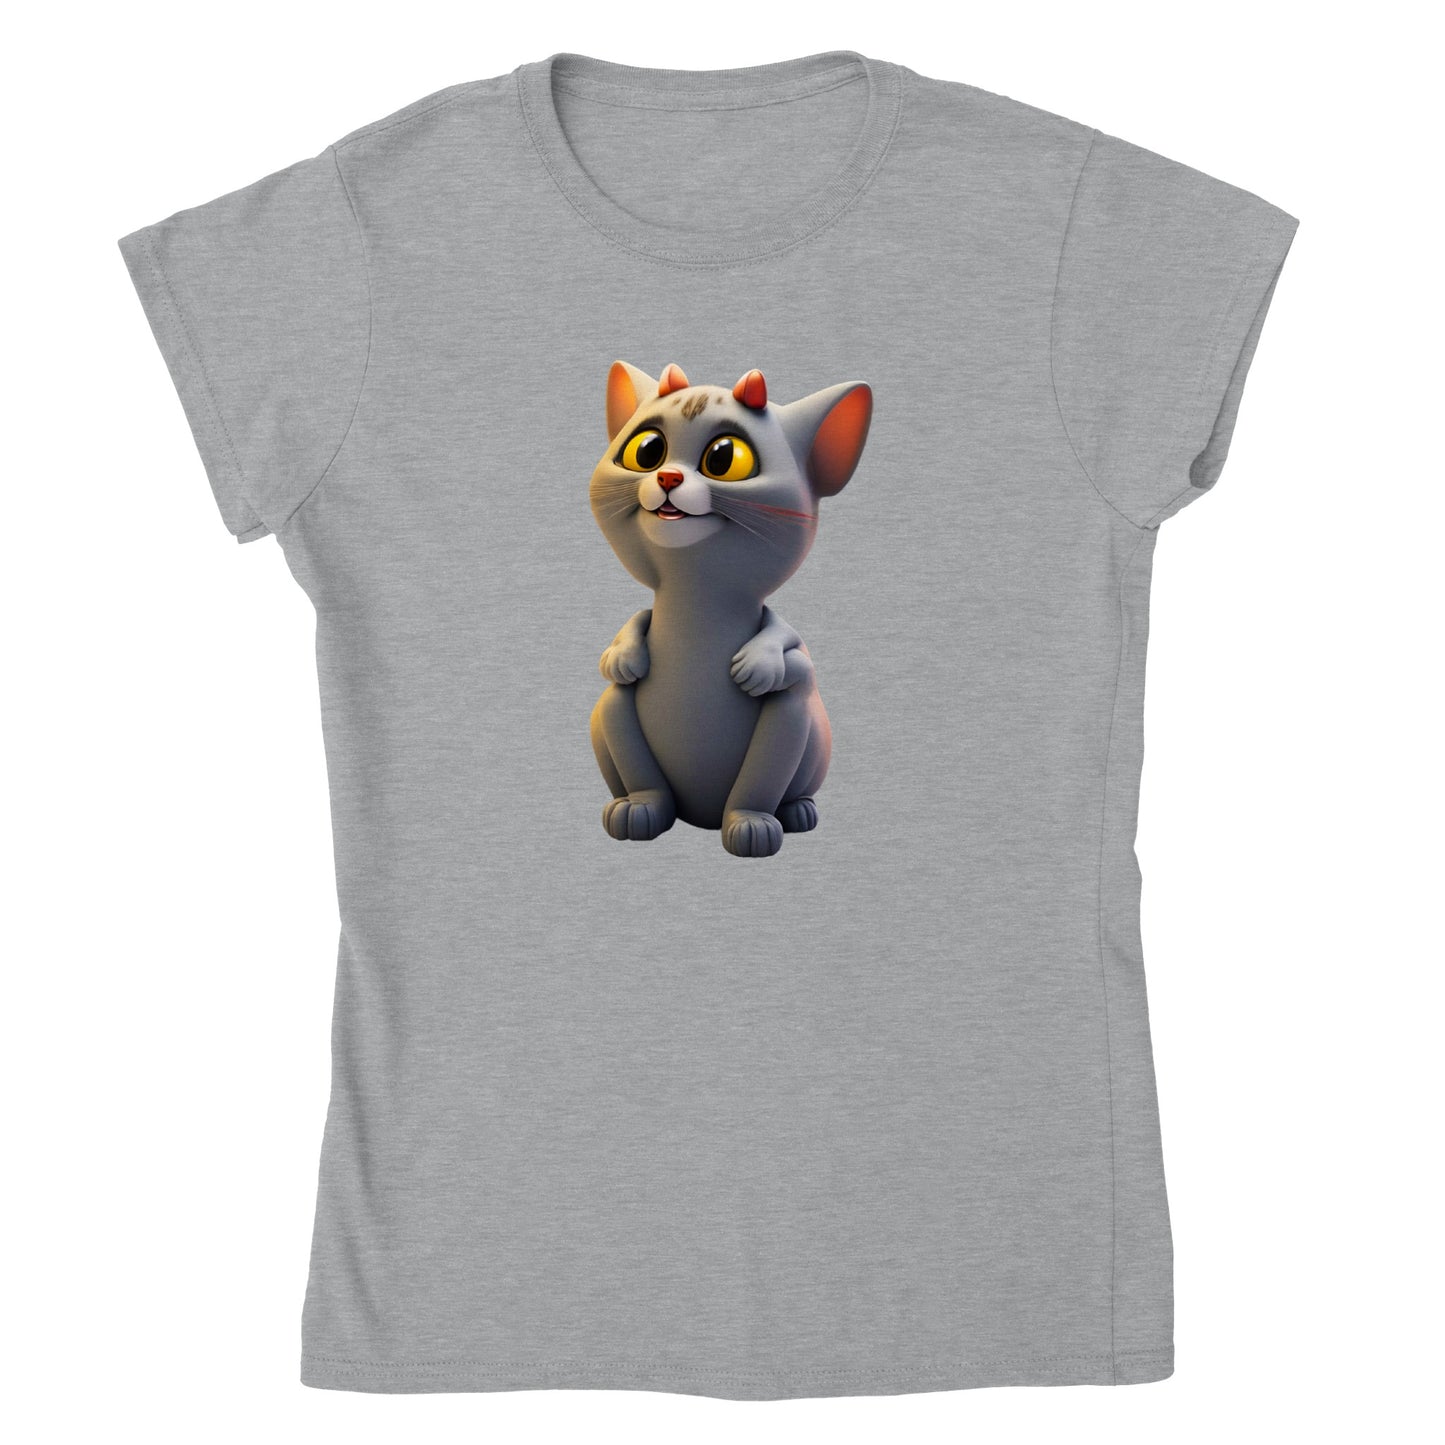 Adorable, Cool, Cute Cats and Kittens Toy - Classic Women’s Crewneck T-Shirt 49